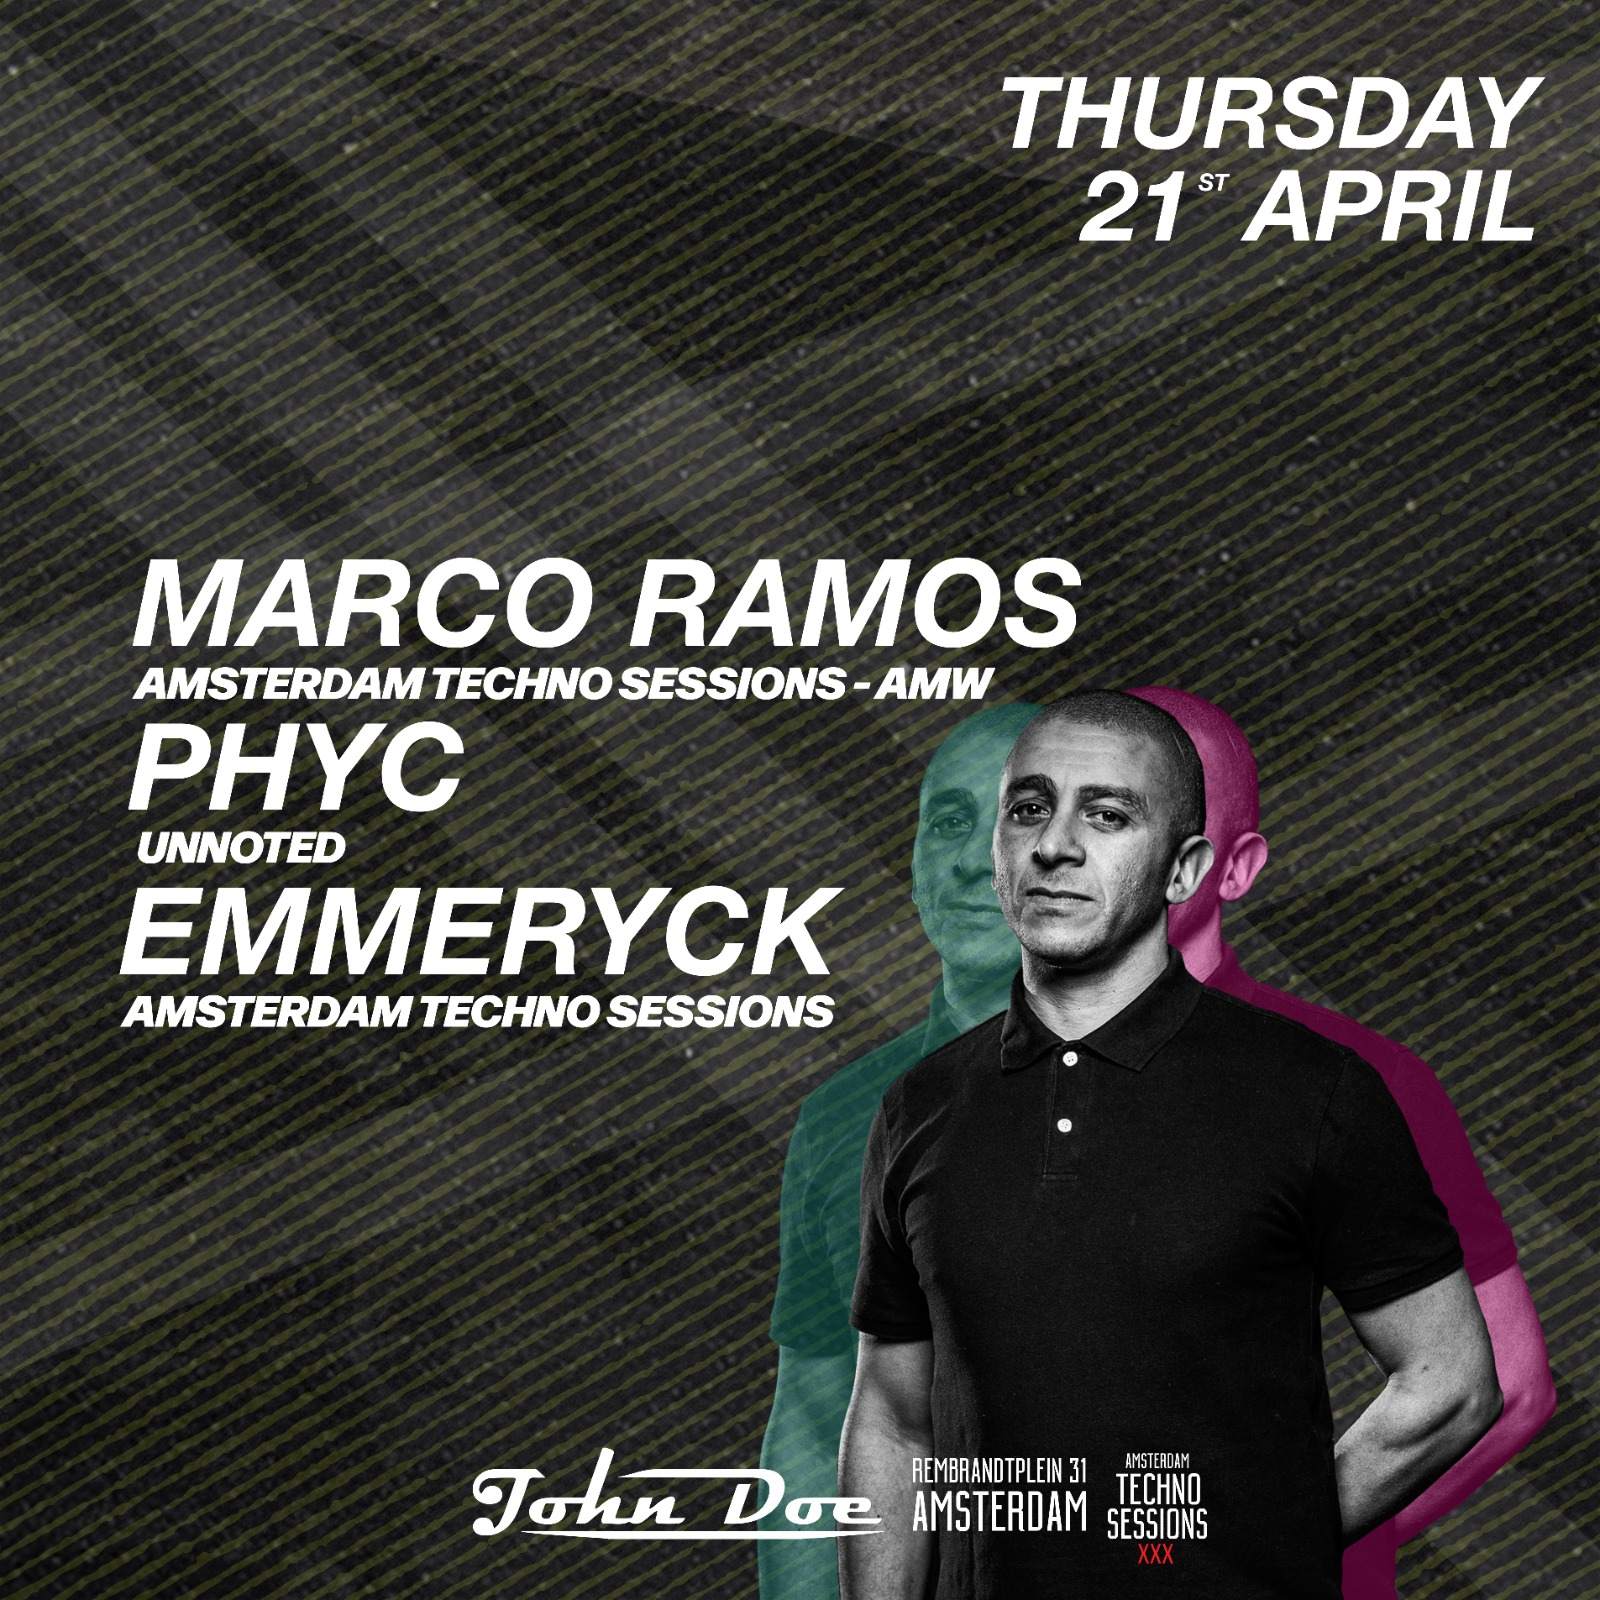 Amsterdam Techno Sessions with Marco Ramos, PHYC & Emmeryck - フライヤー裏